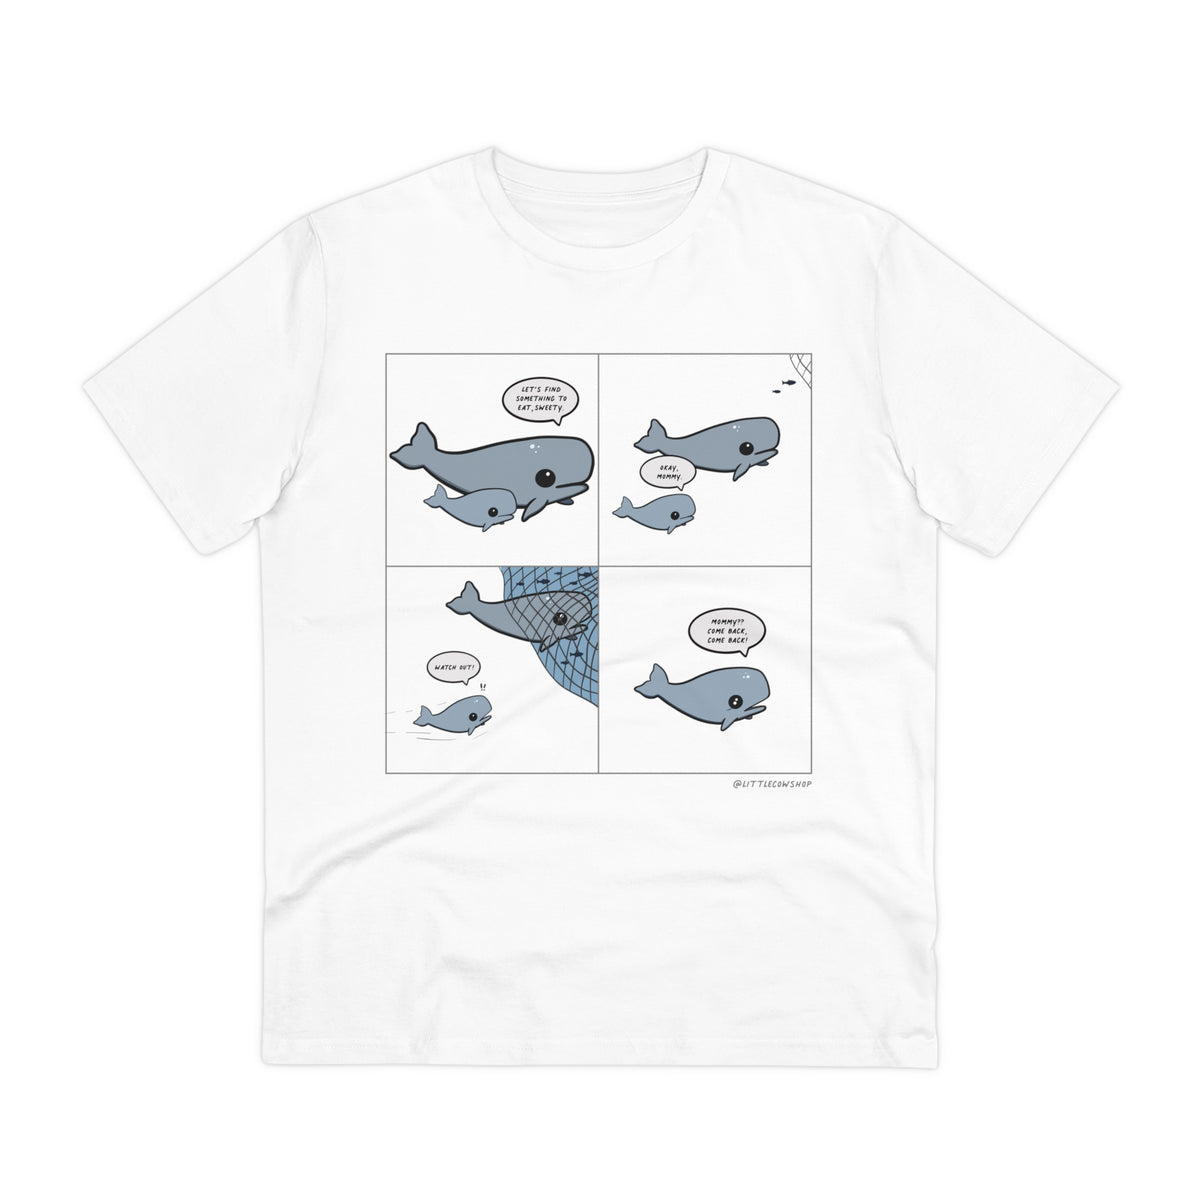 White t-shirt, on the front there are four illustrated panels, the first one showing a mother whale swimming next her baby whale, "let's find something to eat, sweetie." Next panel the baby says, "Okay, mommy." In the next panel the baby cries out, "Watch out!", as the mother whale gets trapped in a fishing net. In the final panel, the baby is on her own and says "Mommy? Come back, come back." 